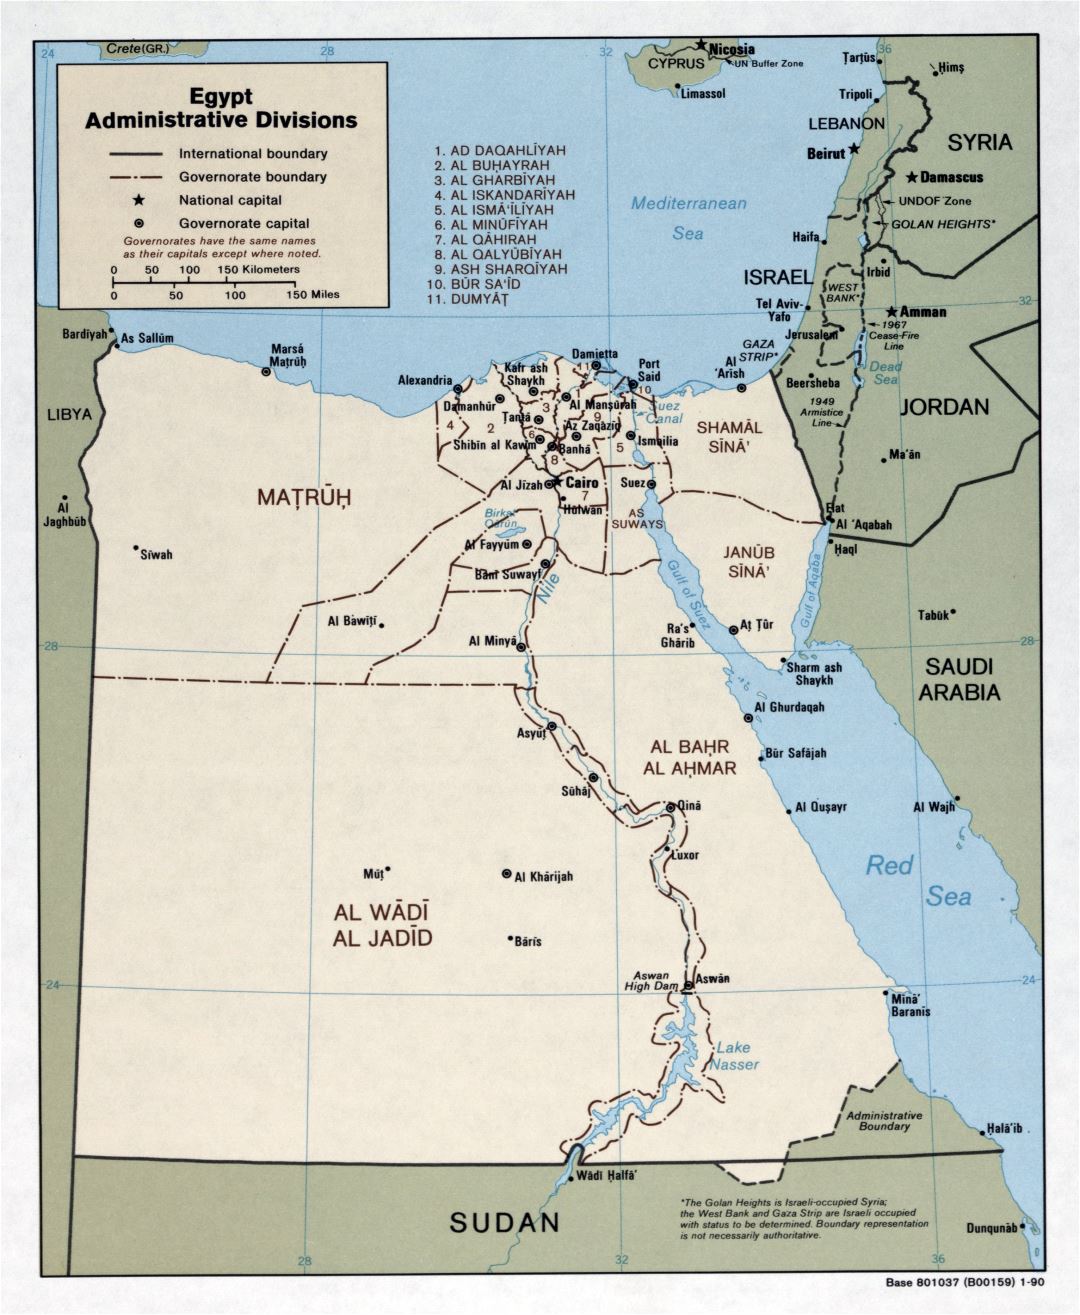 Large scale administrative divisions map of Egypt - 1990